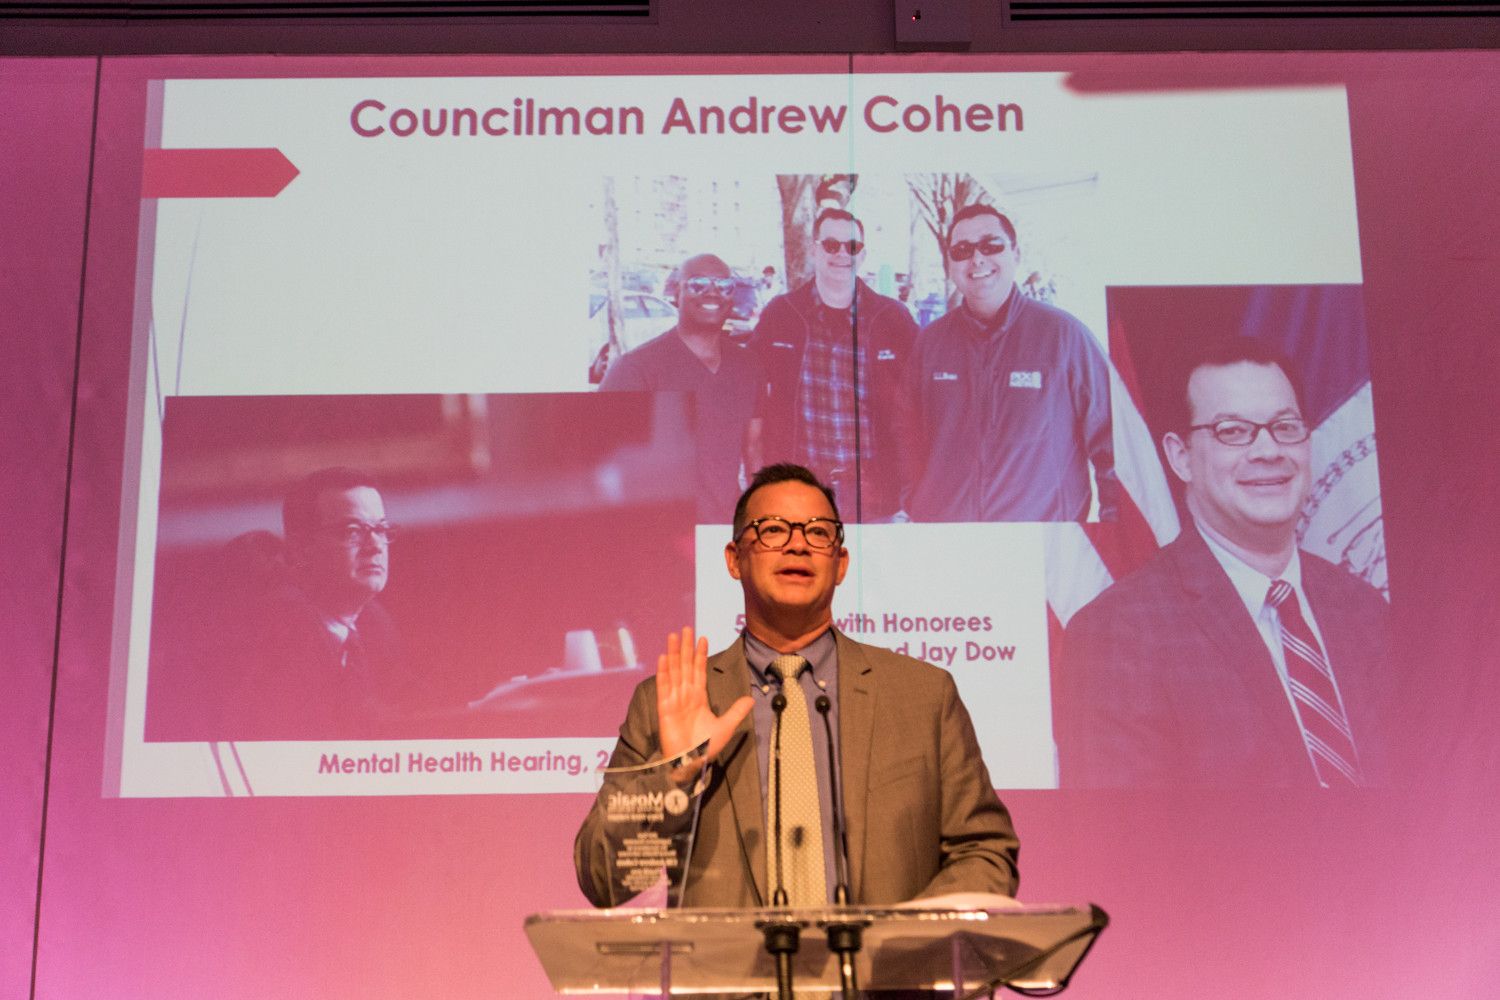 Councilman Andrew Cohen, one of Mosaic's honorees, talks about the importance of mental health in his work.